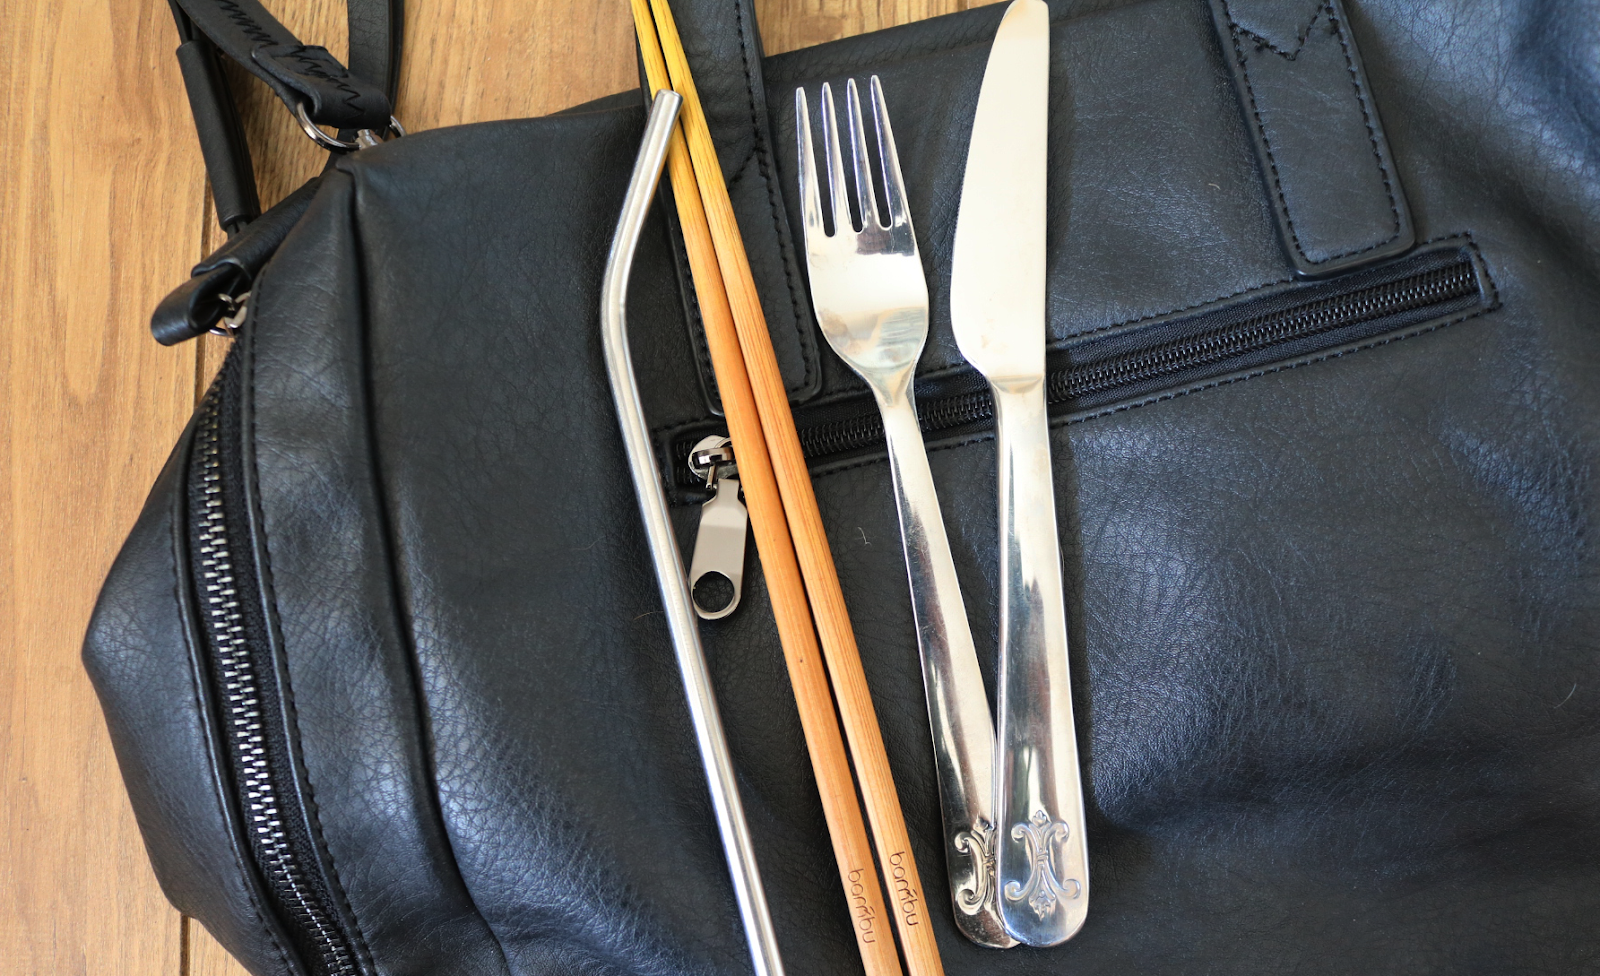 Tip 3: Say No To Disposable Cutlery and Straws